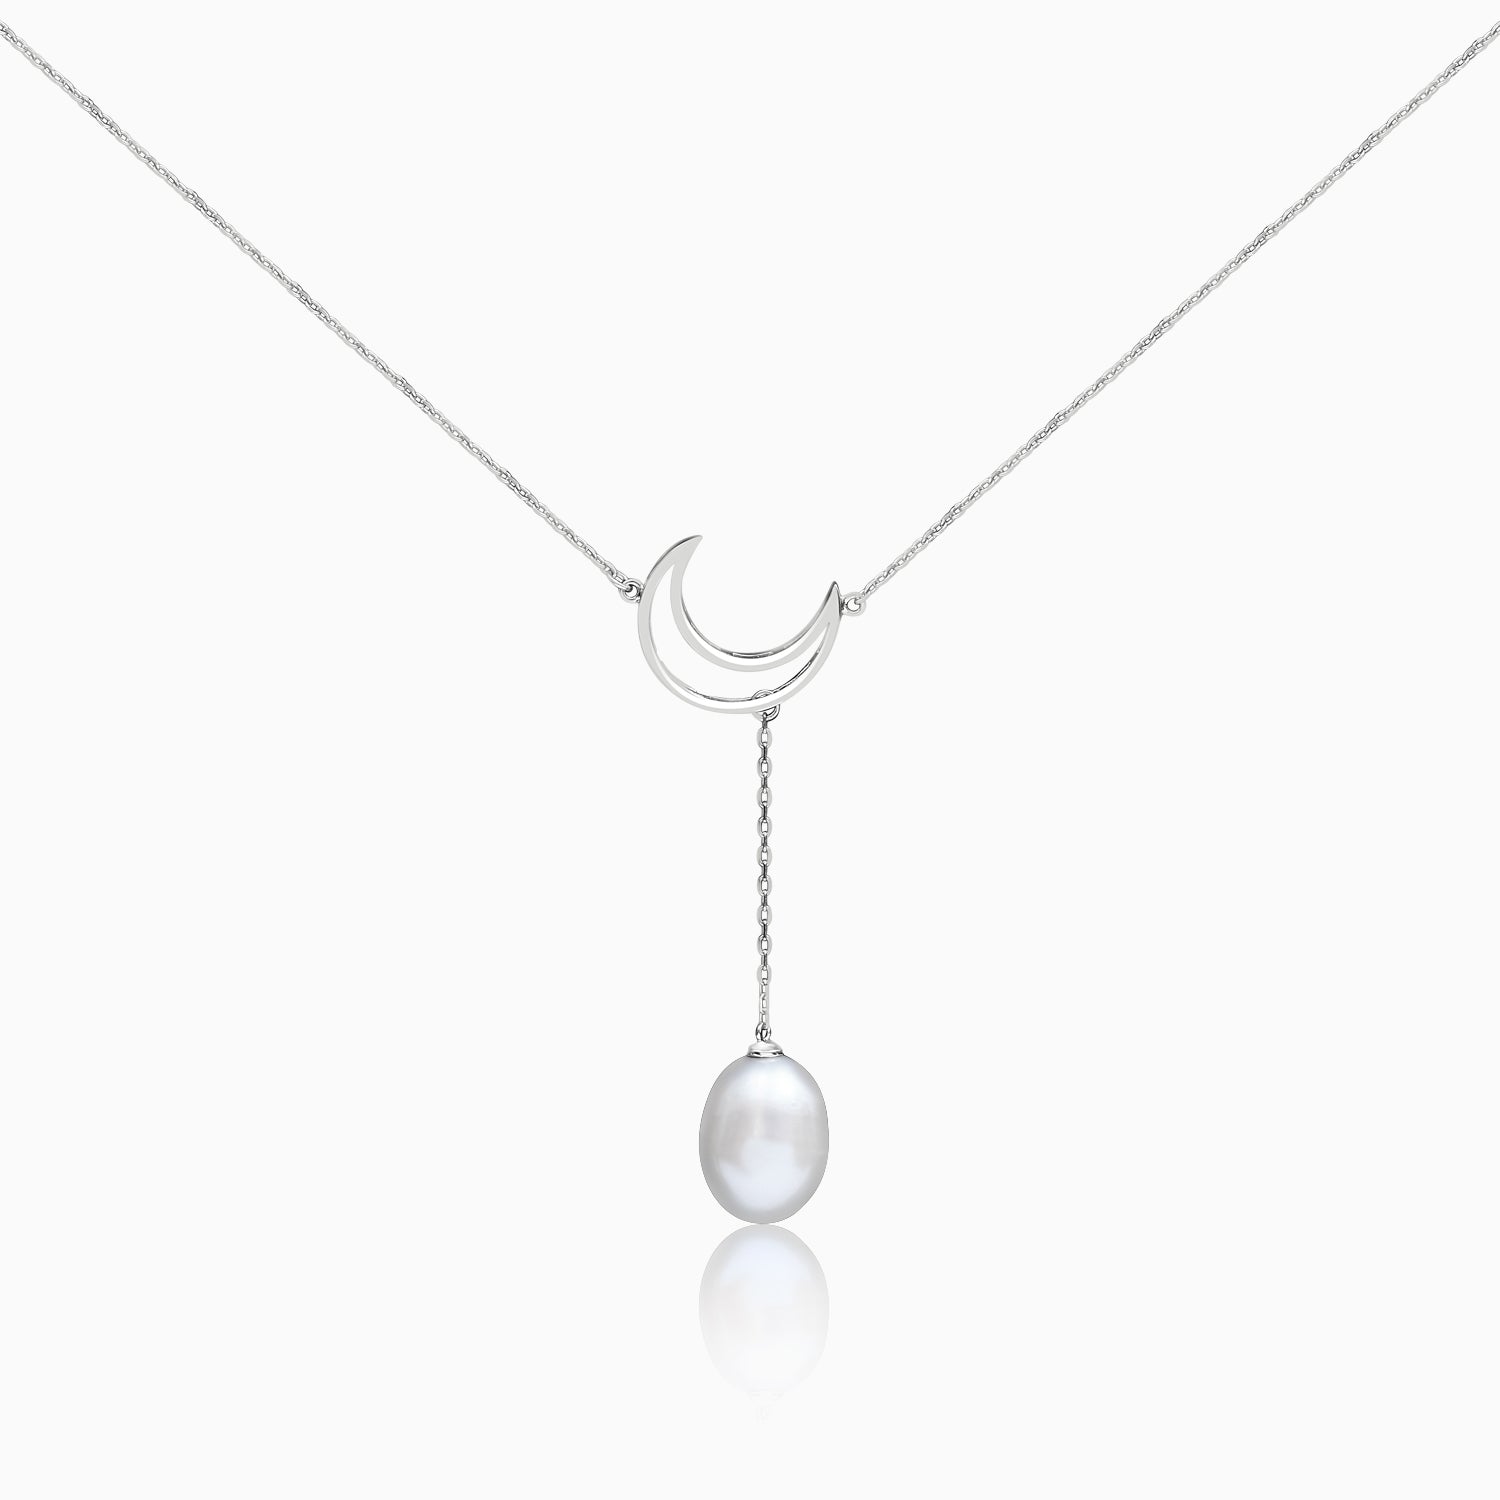 Silver Crescent Moon Pearl Necklace